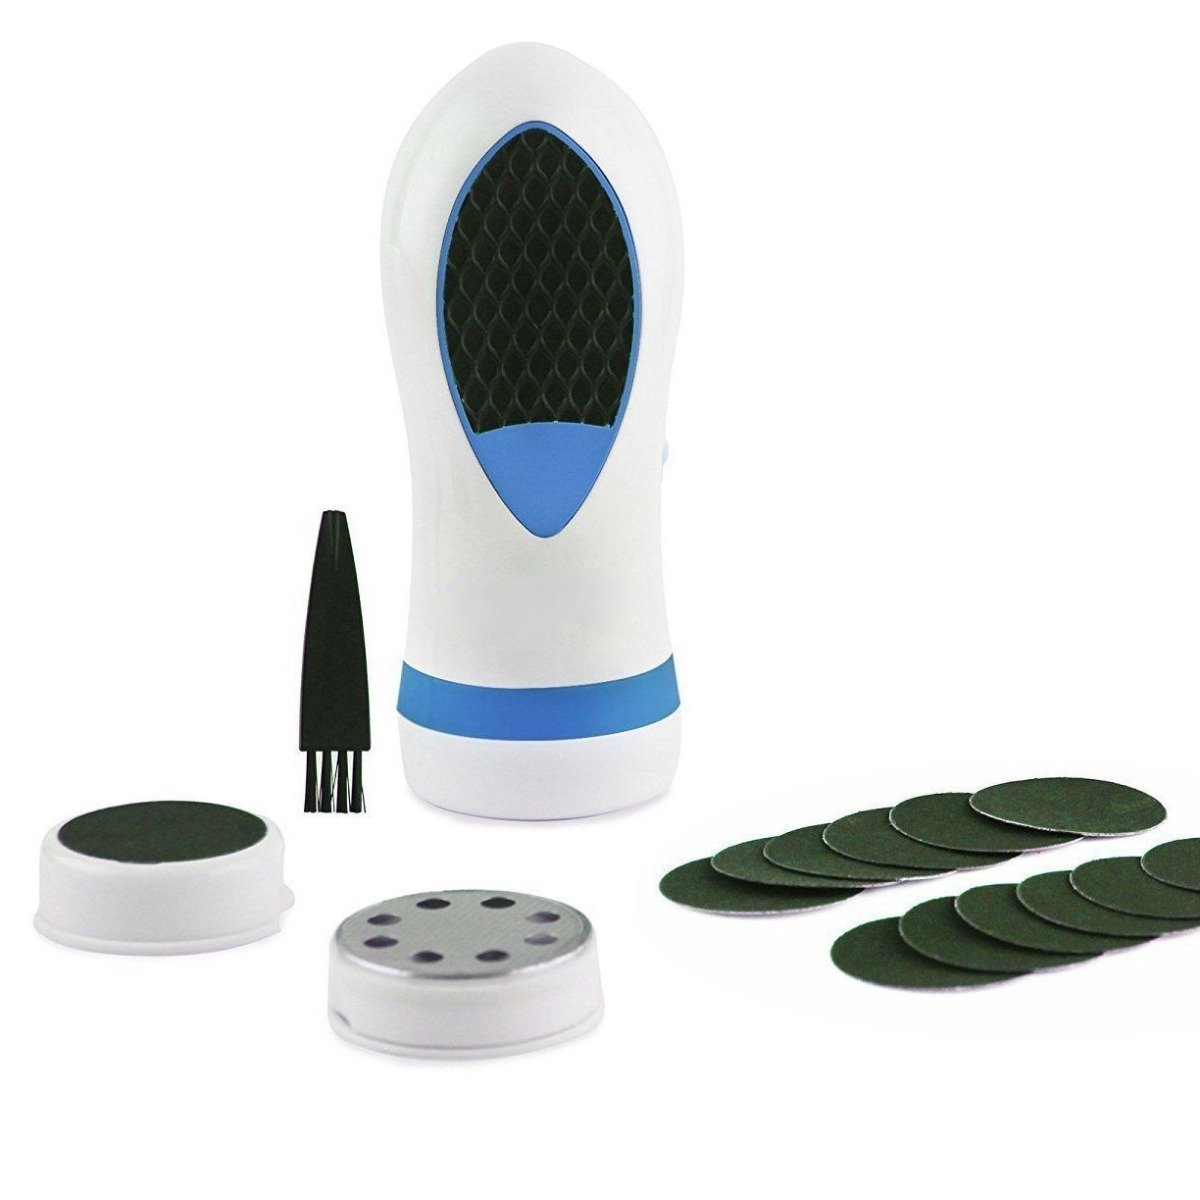 Professional Pedicure Callus Remover - Mounteen. Worldwide shipping available.